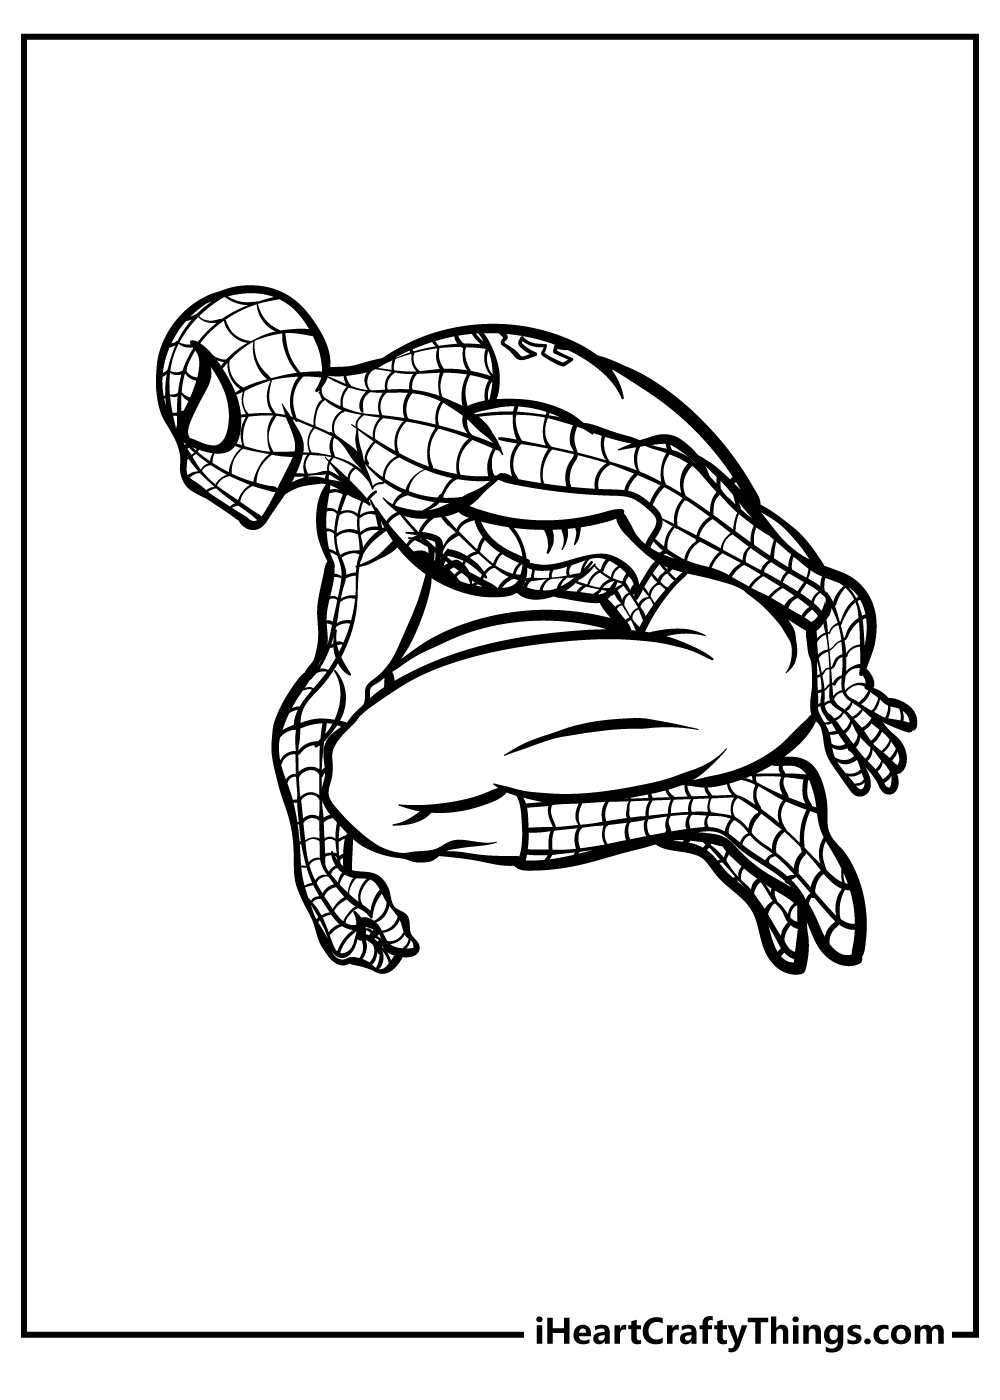 Spider-Man Coloring Pages for preschoolers free printable